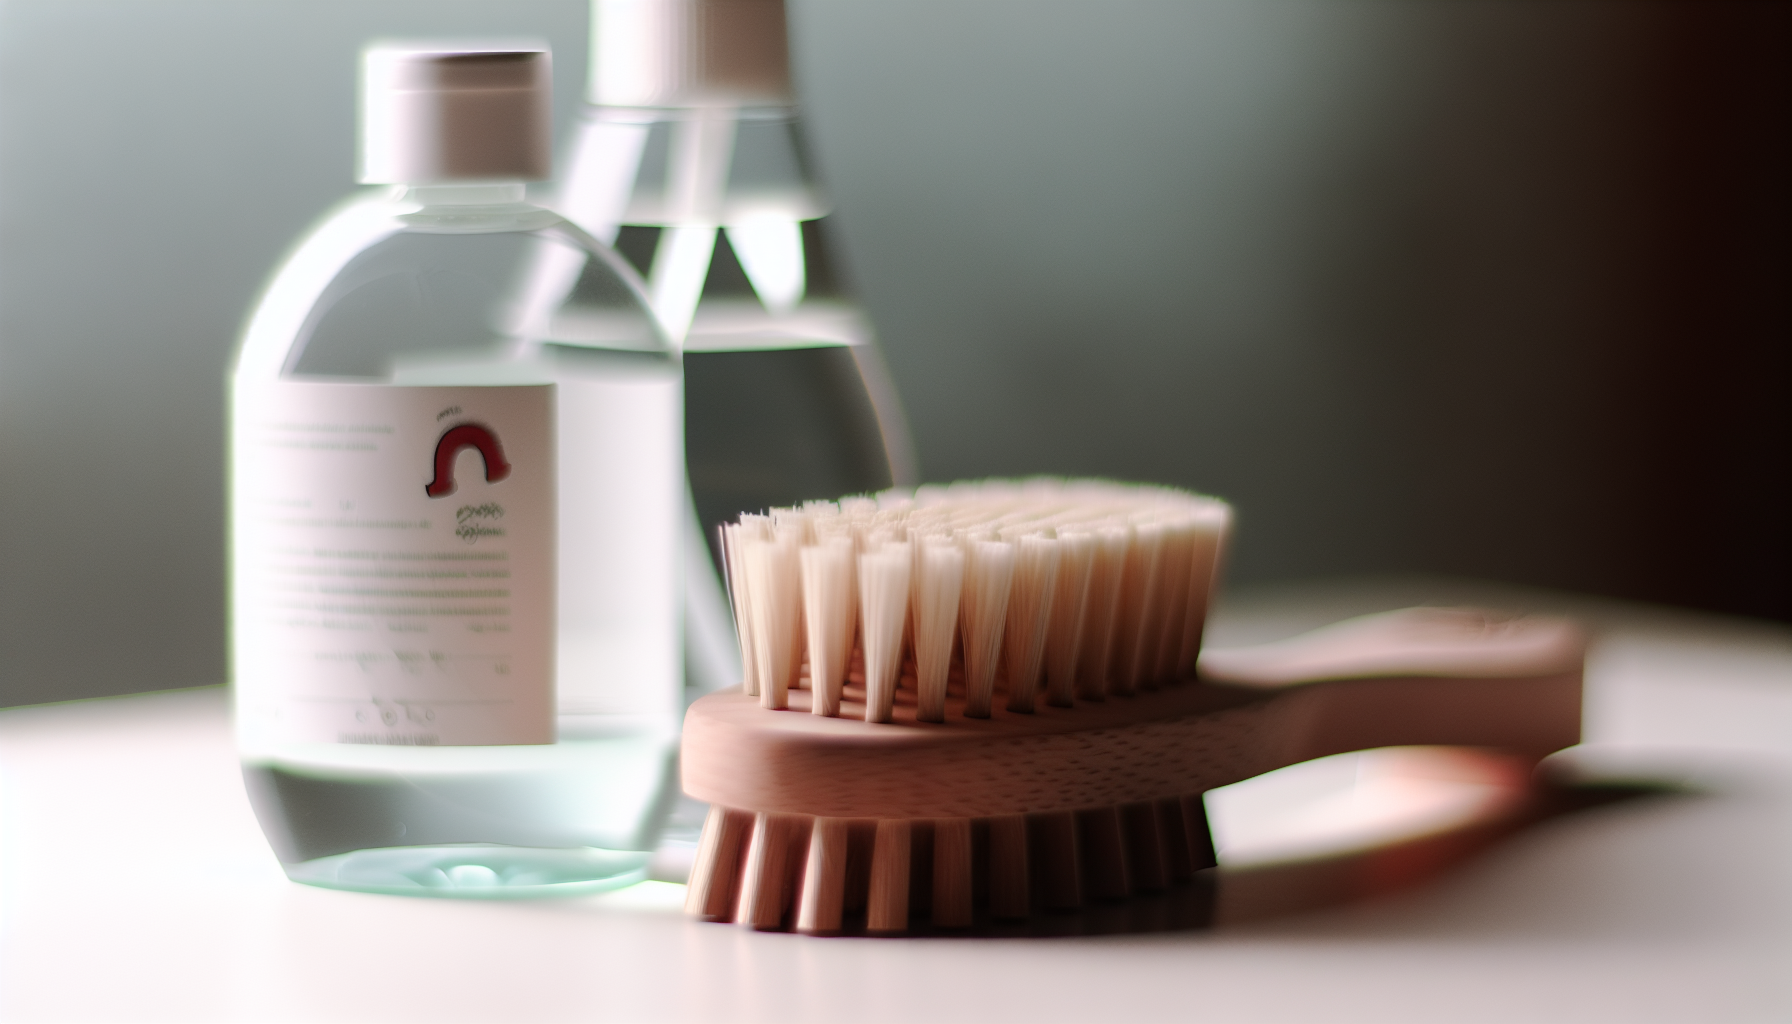 Soft-bristled brush and mild detergent for hat cleaning